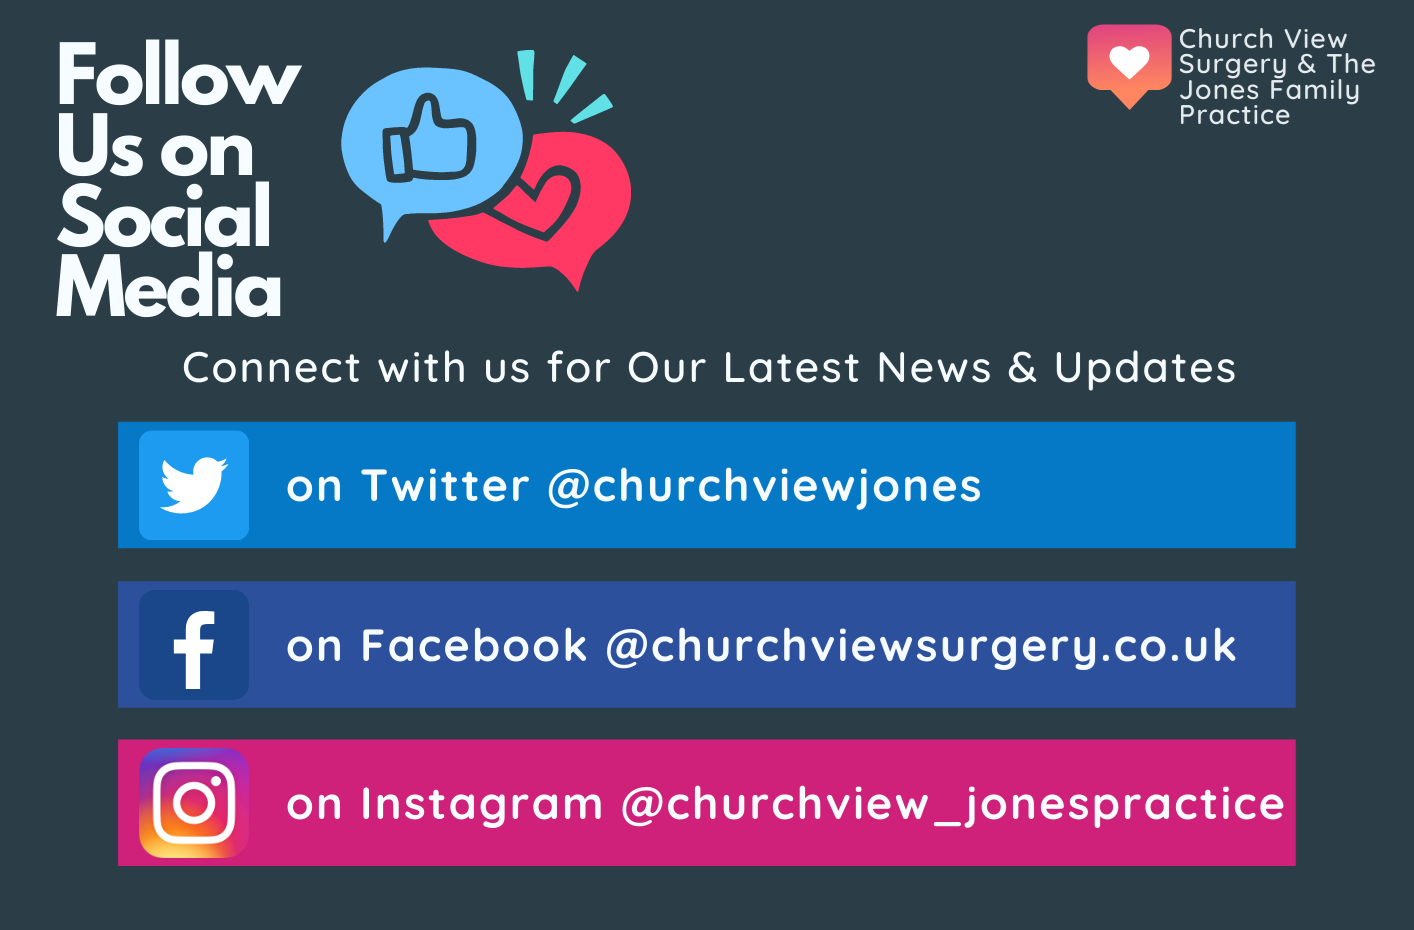 Homepage - Church View Surgery & The Jones Family Practice